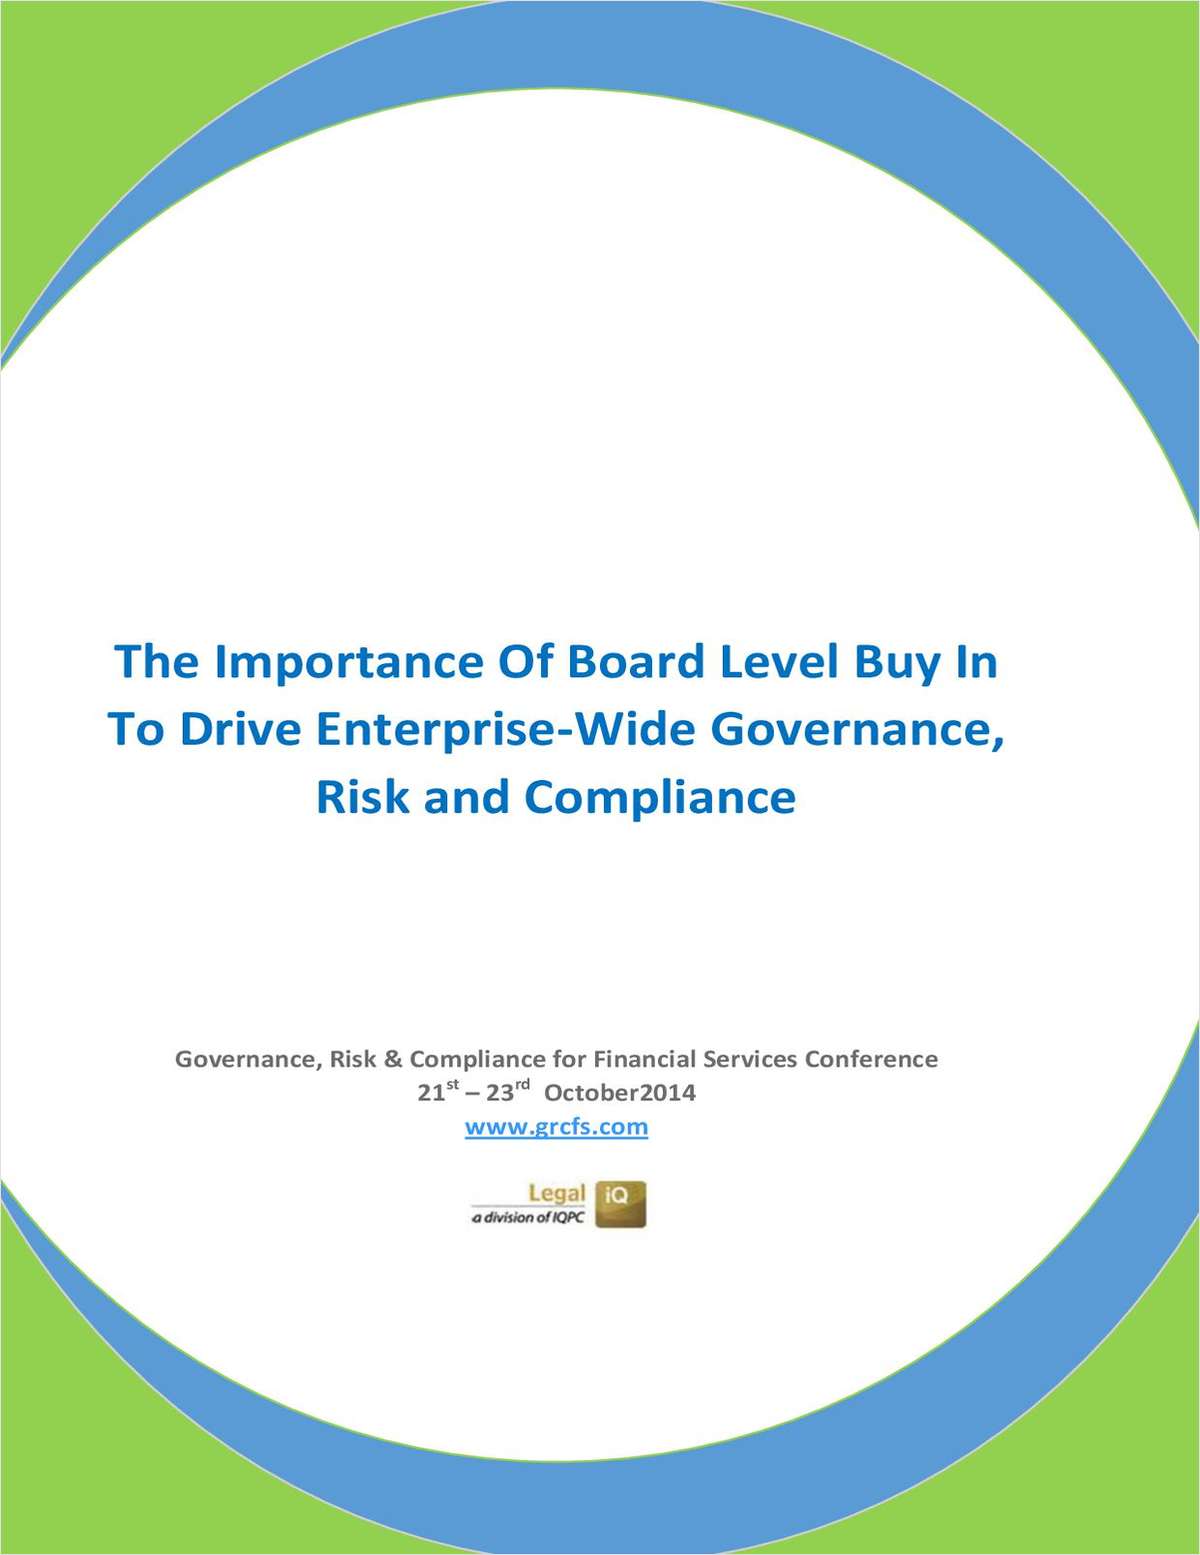 The Importance Of Board Level Buy In To Drive Enterprise-Wide Governance, Risk and Compliance